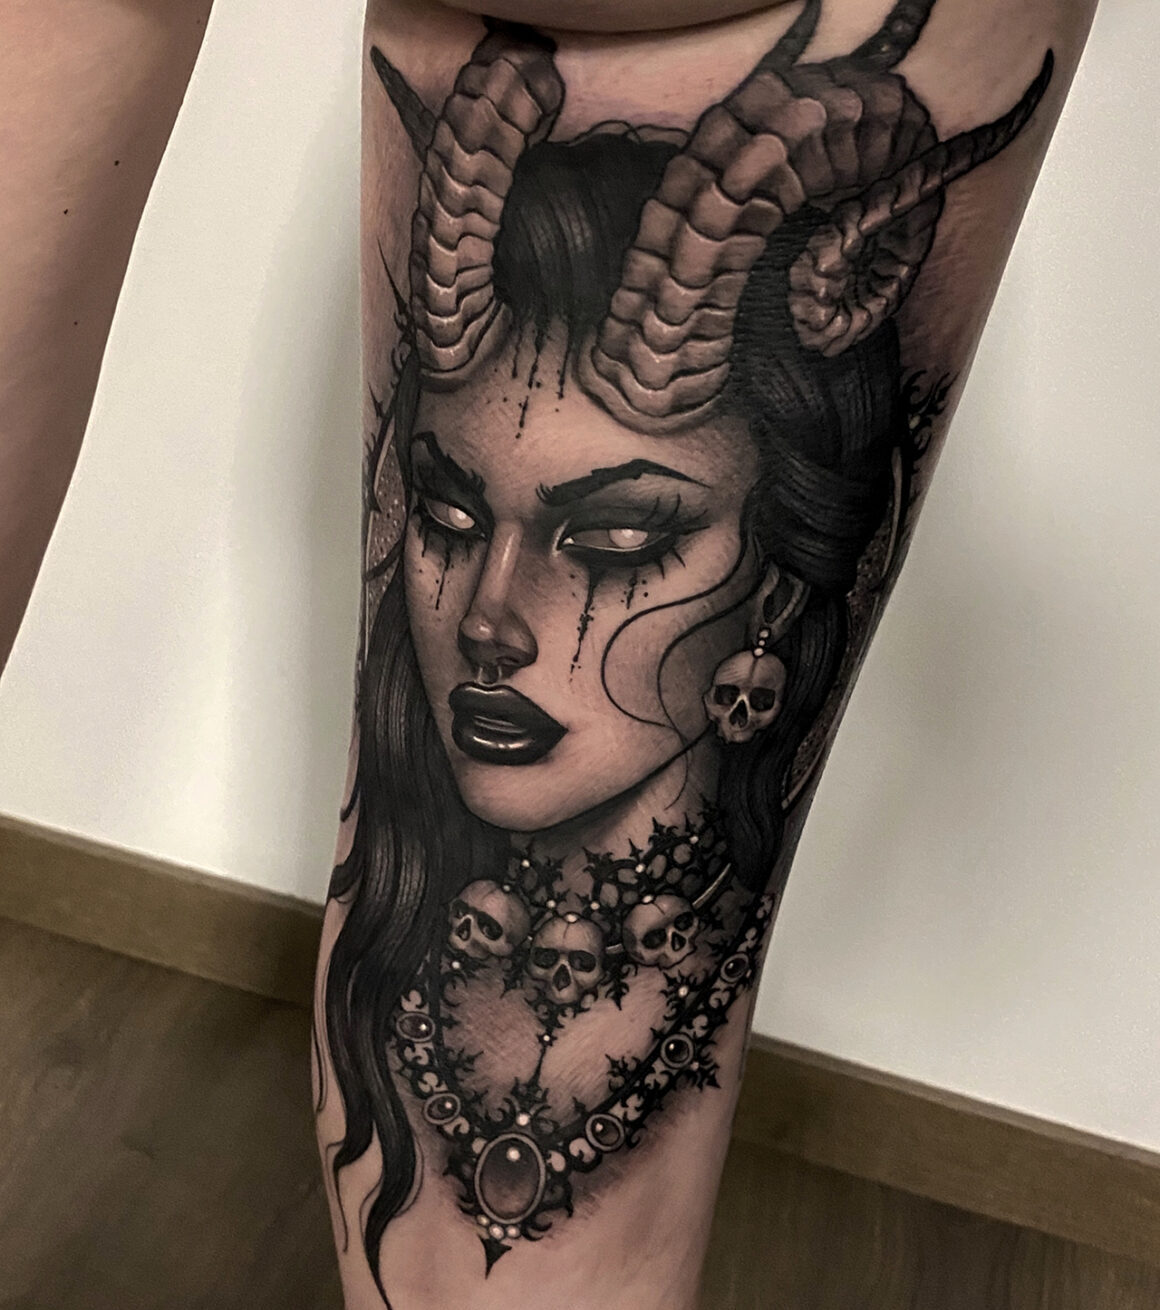 Tattoo by Ccyle, @ccyle